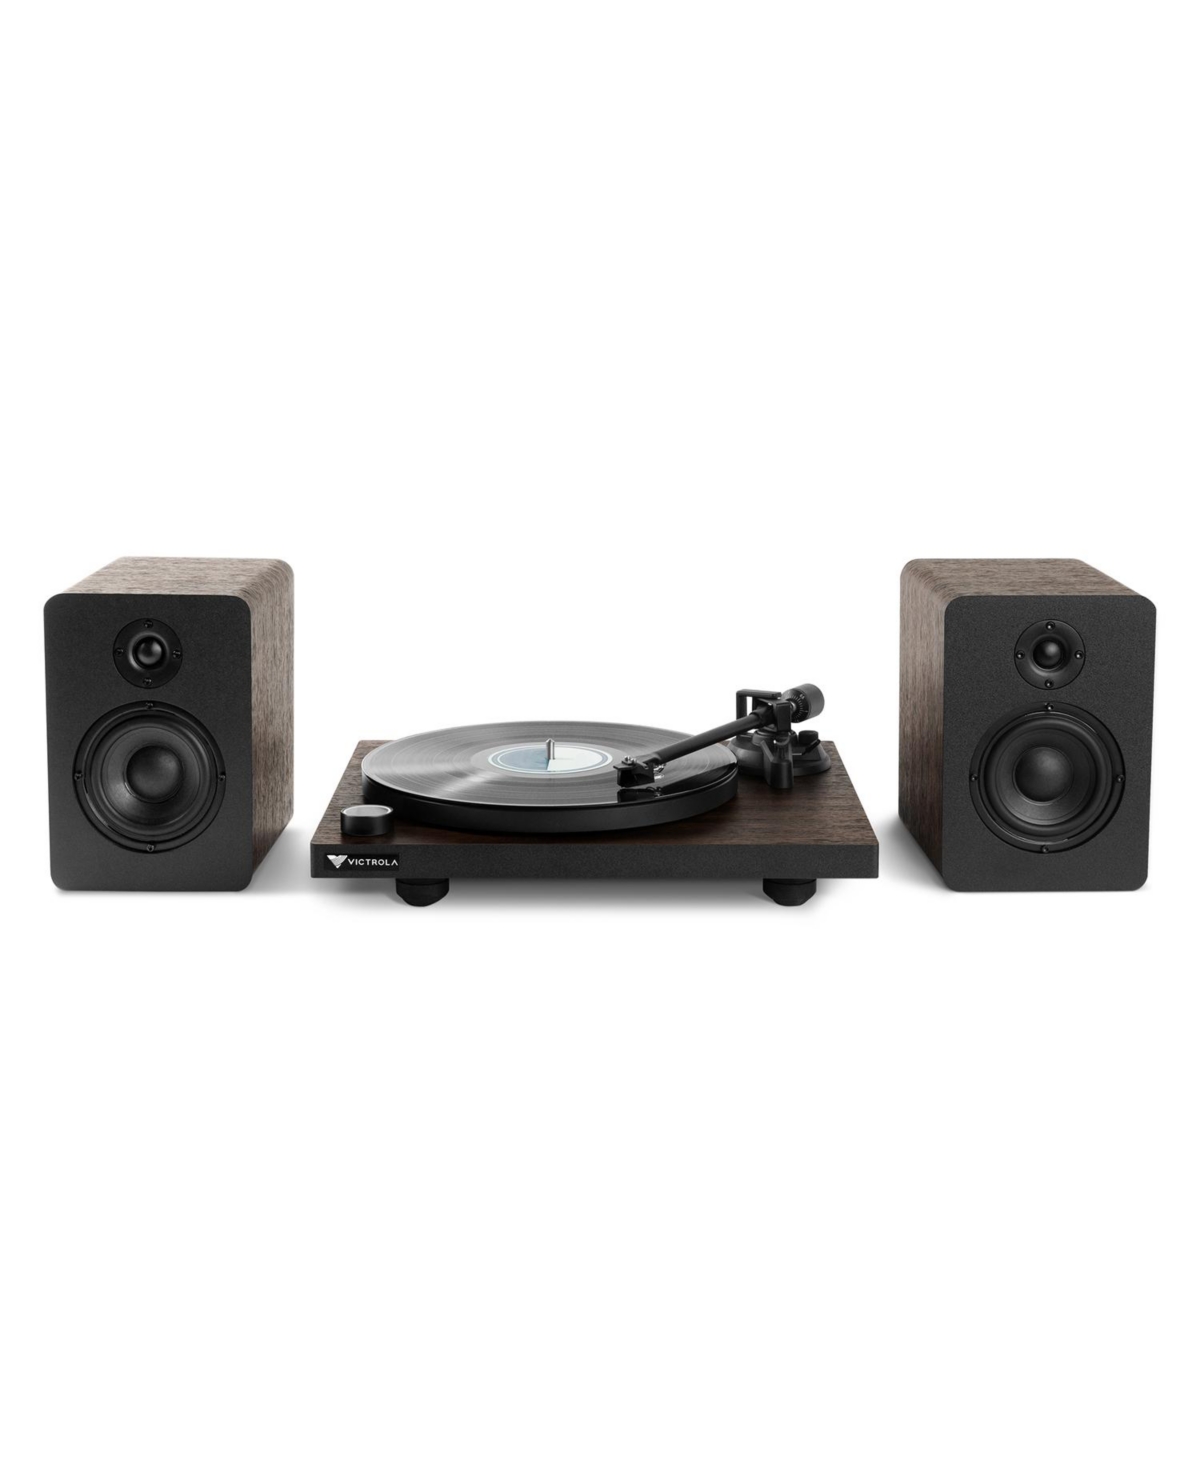 Victrola Premiere T1 Turntable System, Set Of 3 In Espresso